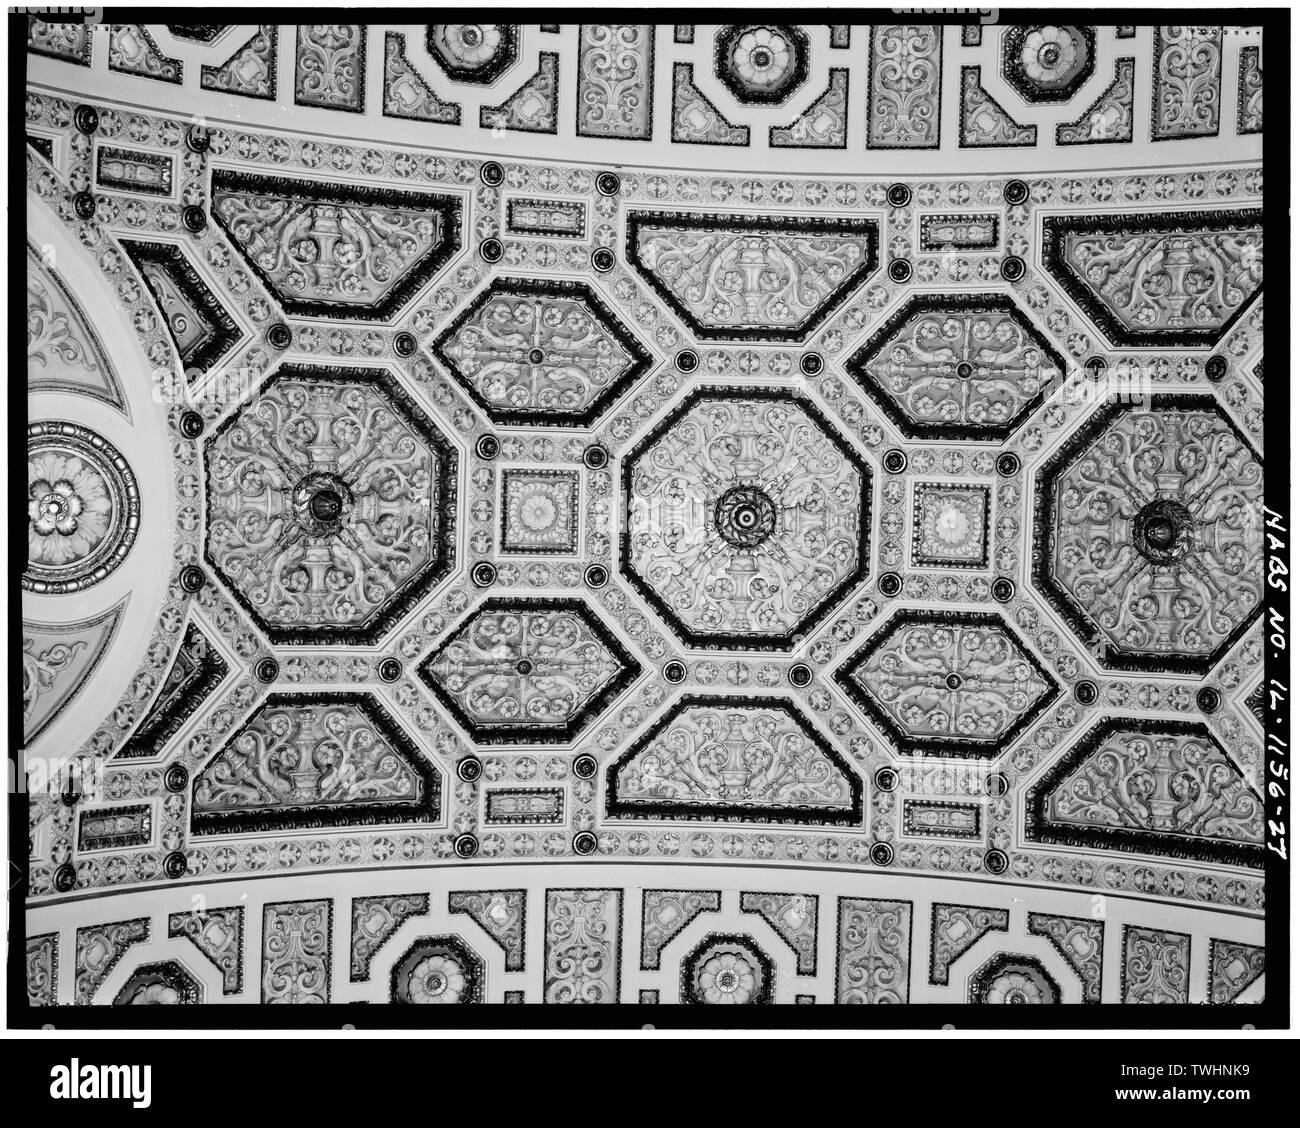 SECTION OF MAIN LOBBY CEILING. - Granada Theatre, 6425-6441 North Sheridan Road, Chicago, Cook County, IL; Levy and Klein; Eichenbaum, Edward E; Marks Brothers Stock Photo